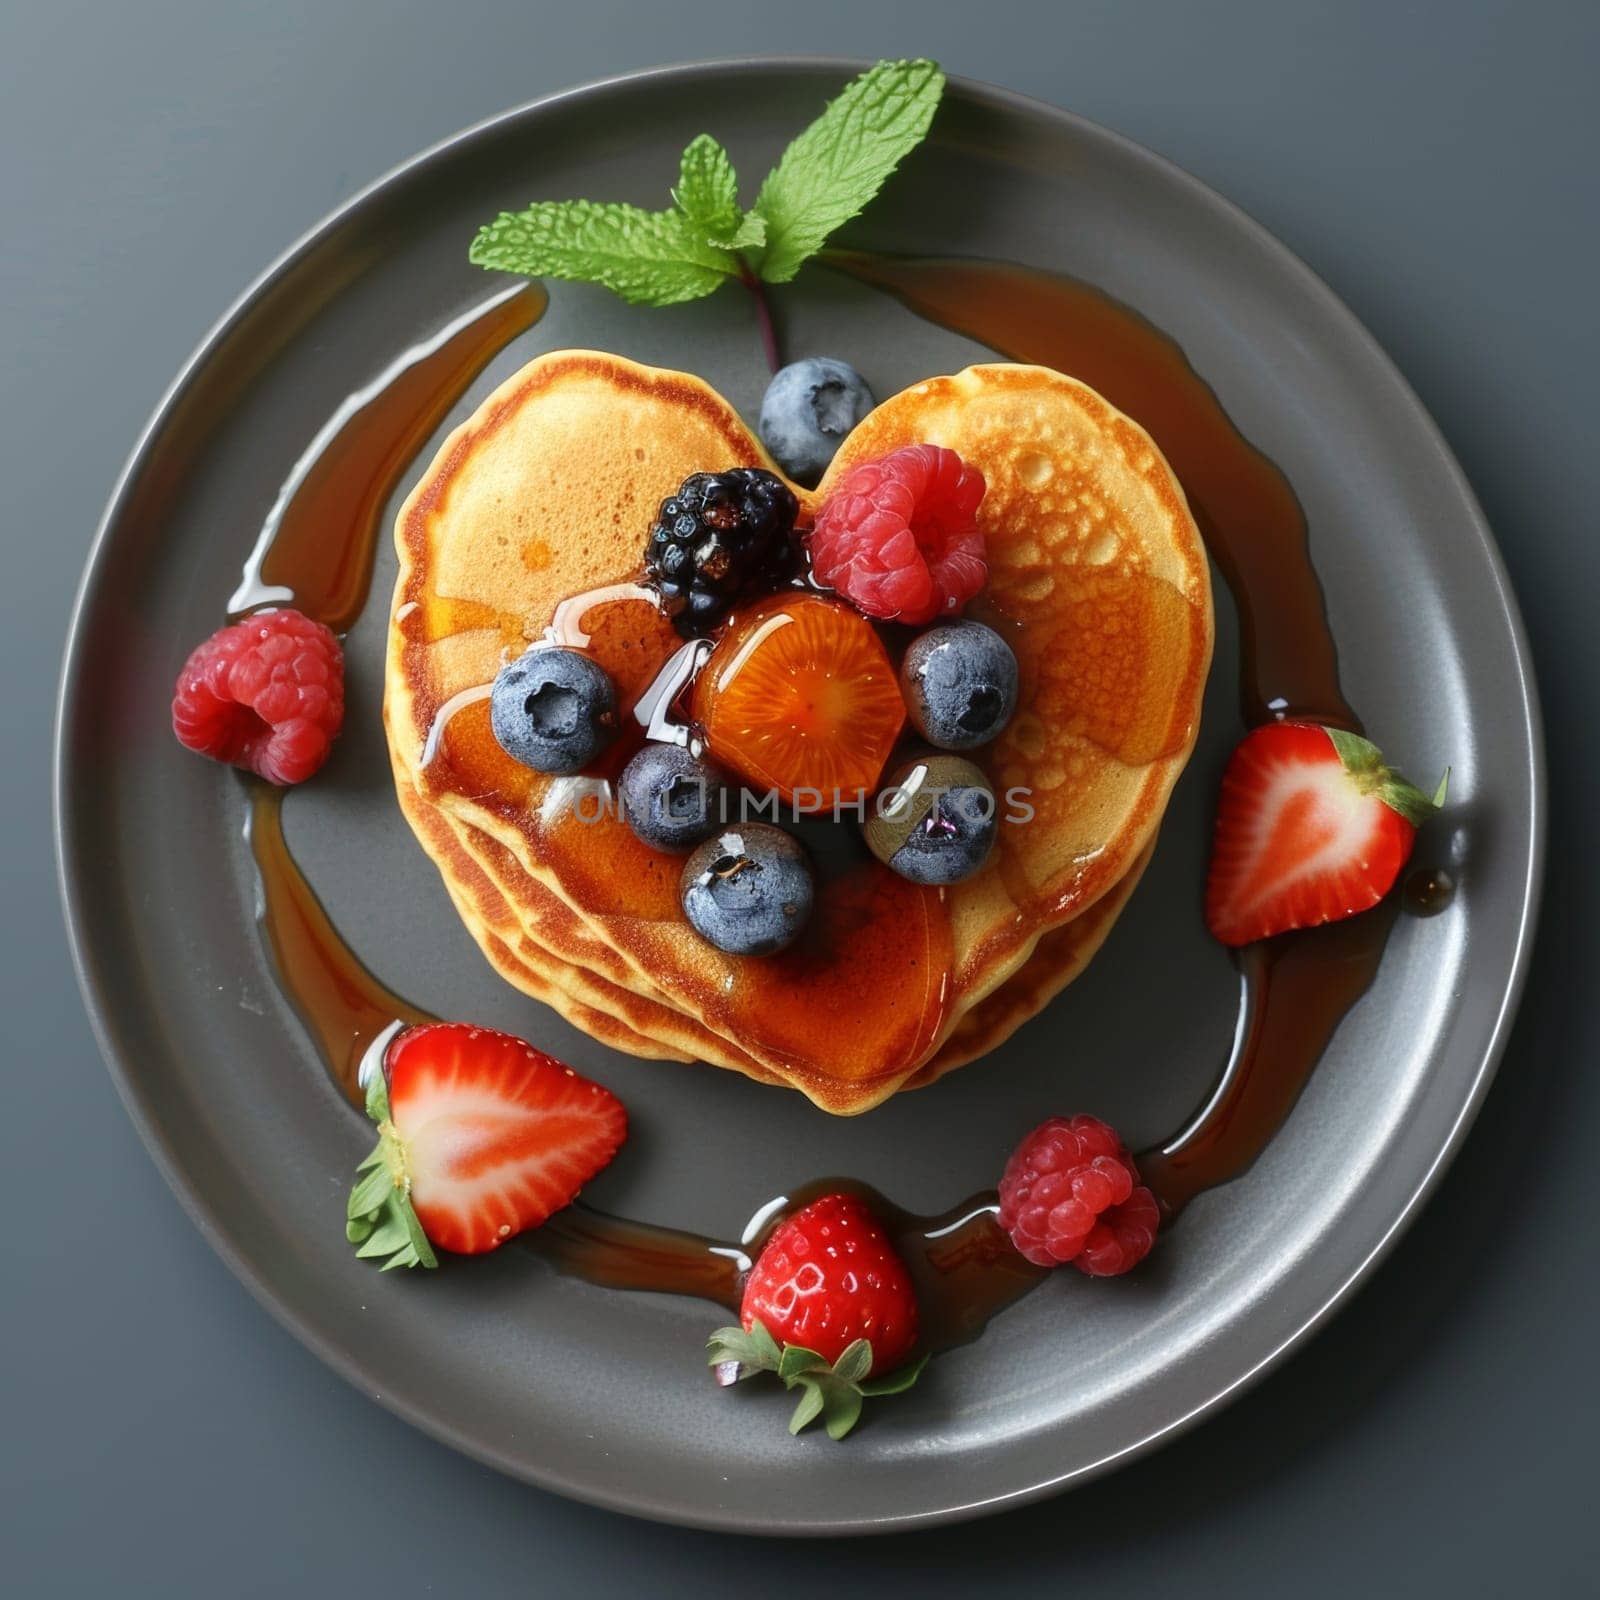 Top view of a plate of healthy gluten free pancakes with blueberries and strawberries on top.